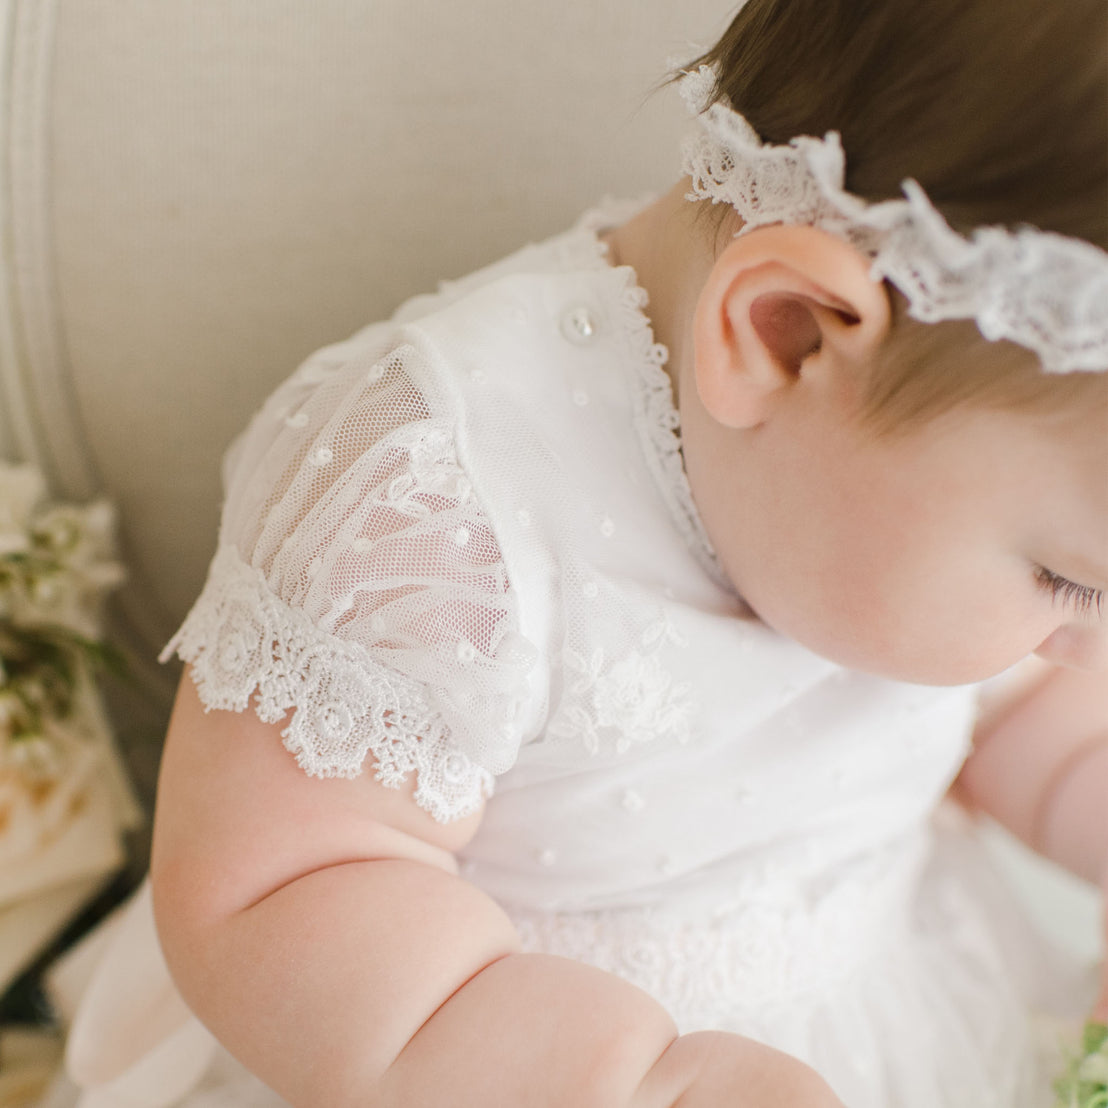 A close-up photo of a baby wearing a Melissa Christening Gown & Bonnet with intricate details, focusing on the shoulder and part of the head with the baby looking downwards.